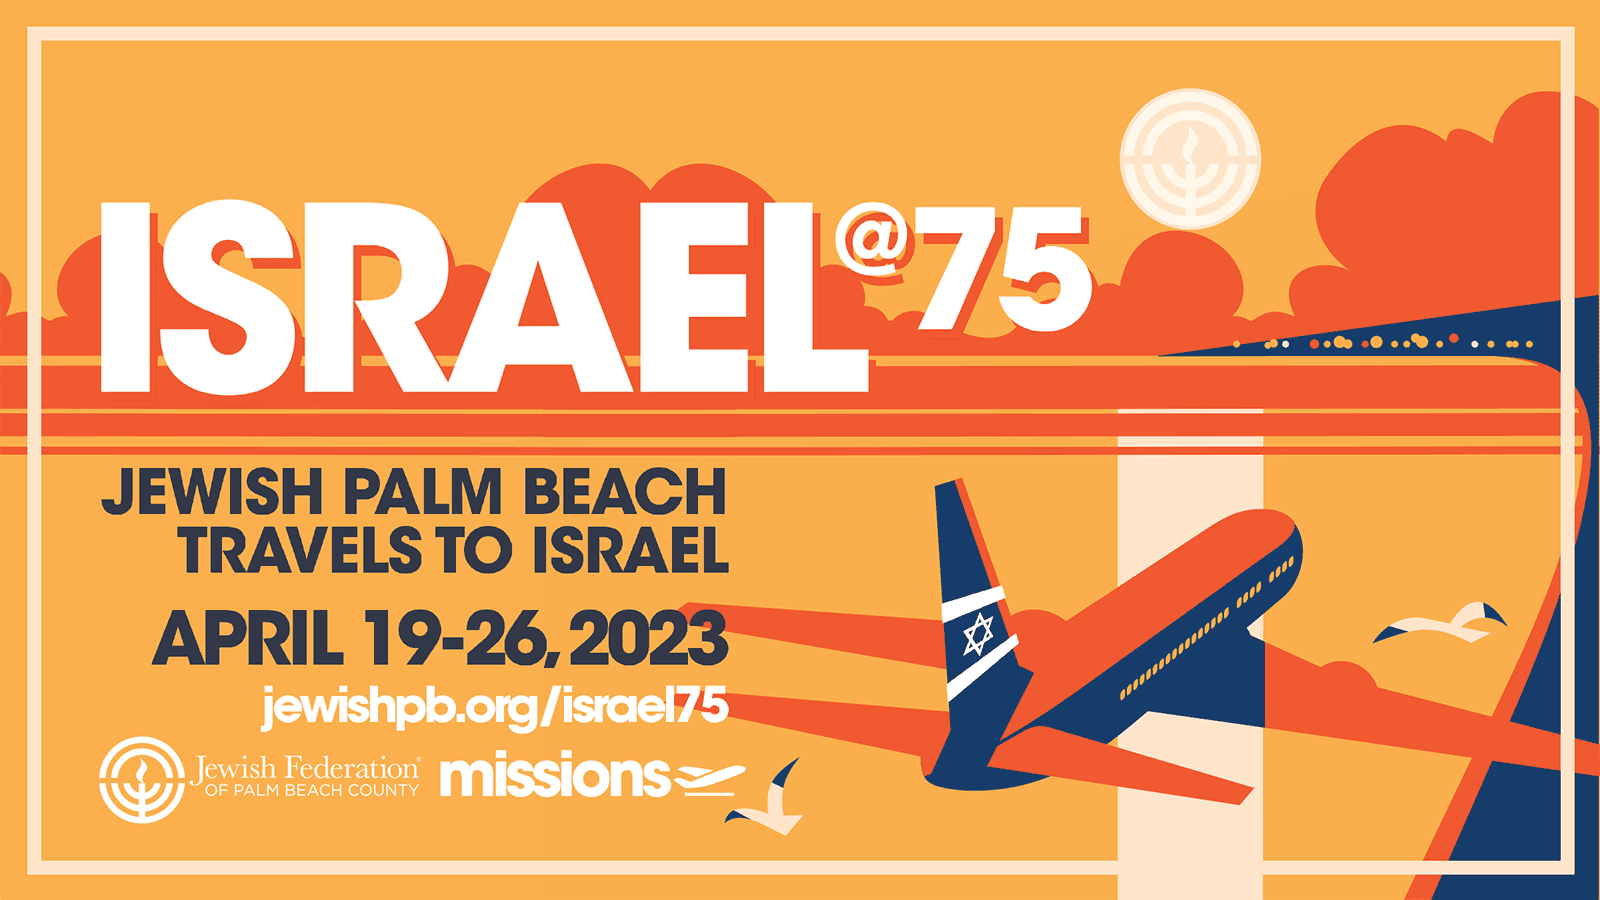 Learn More about Israel@75